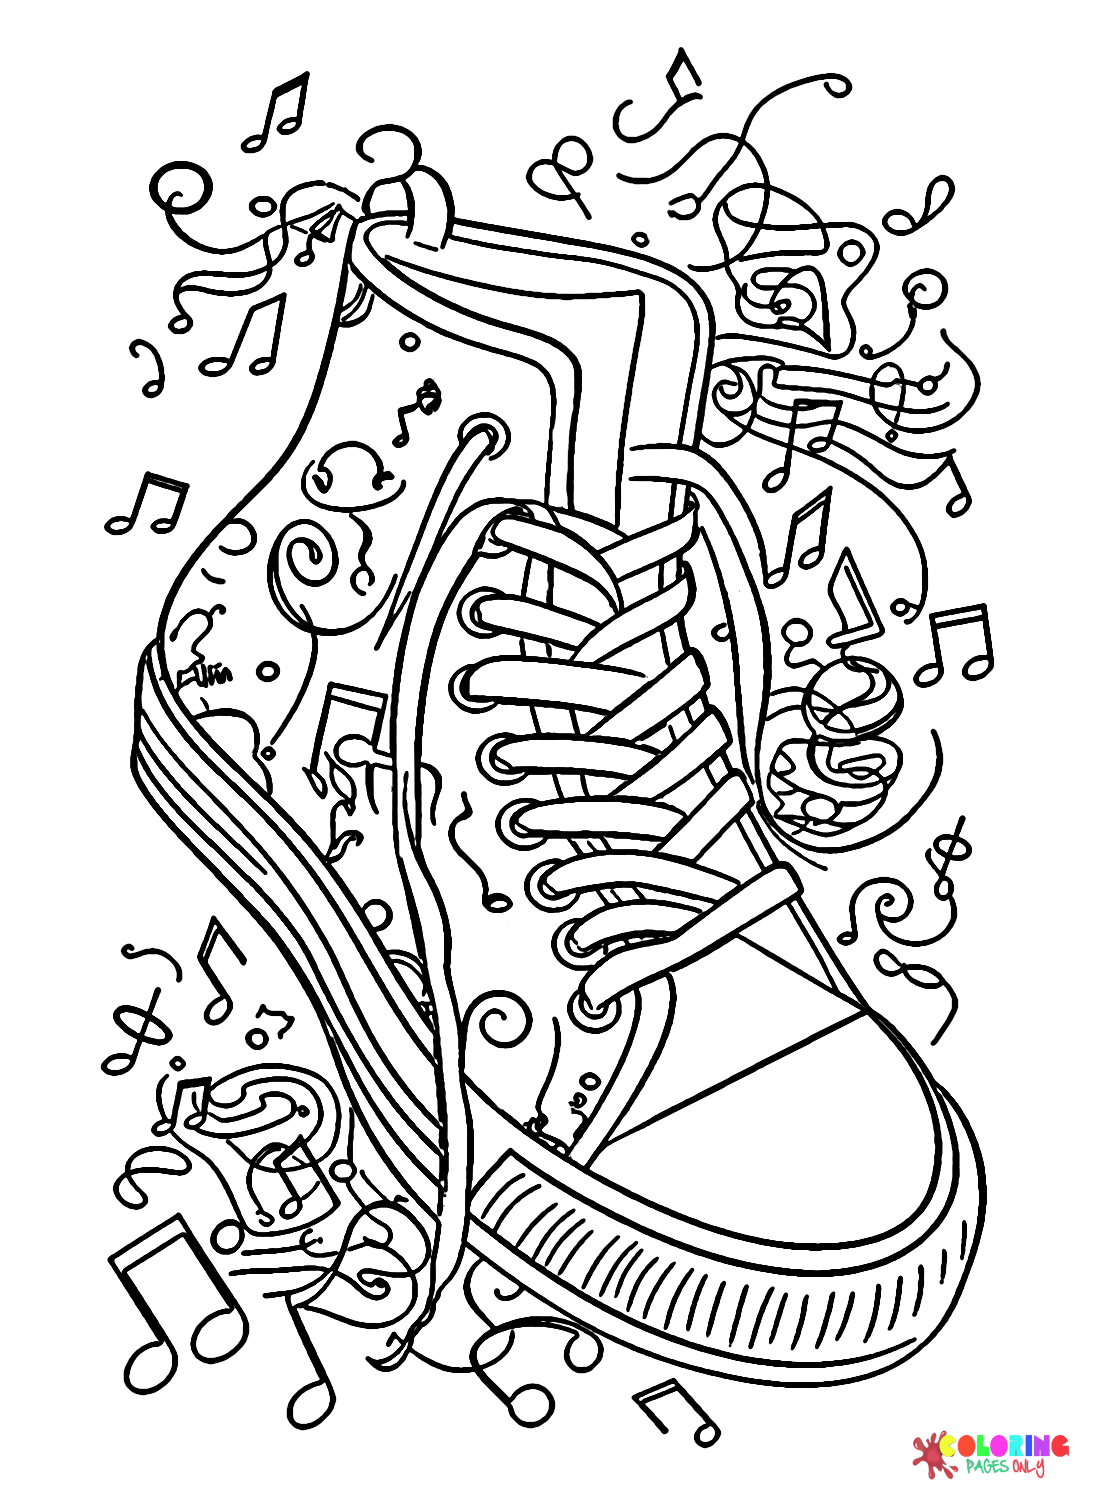 Musici Inspired Sneakers Coloring Page - Free Printable Coloring Pages